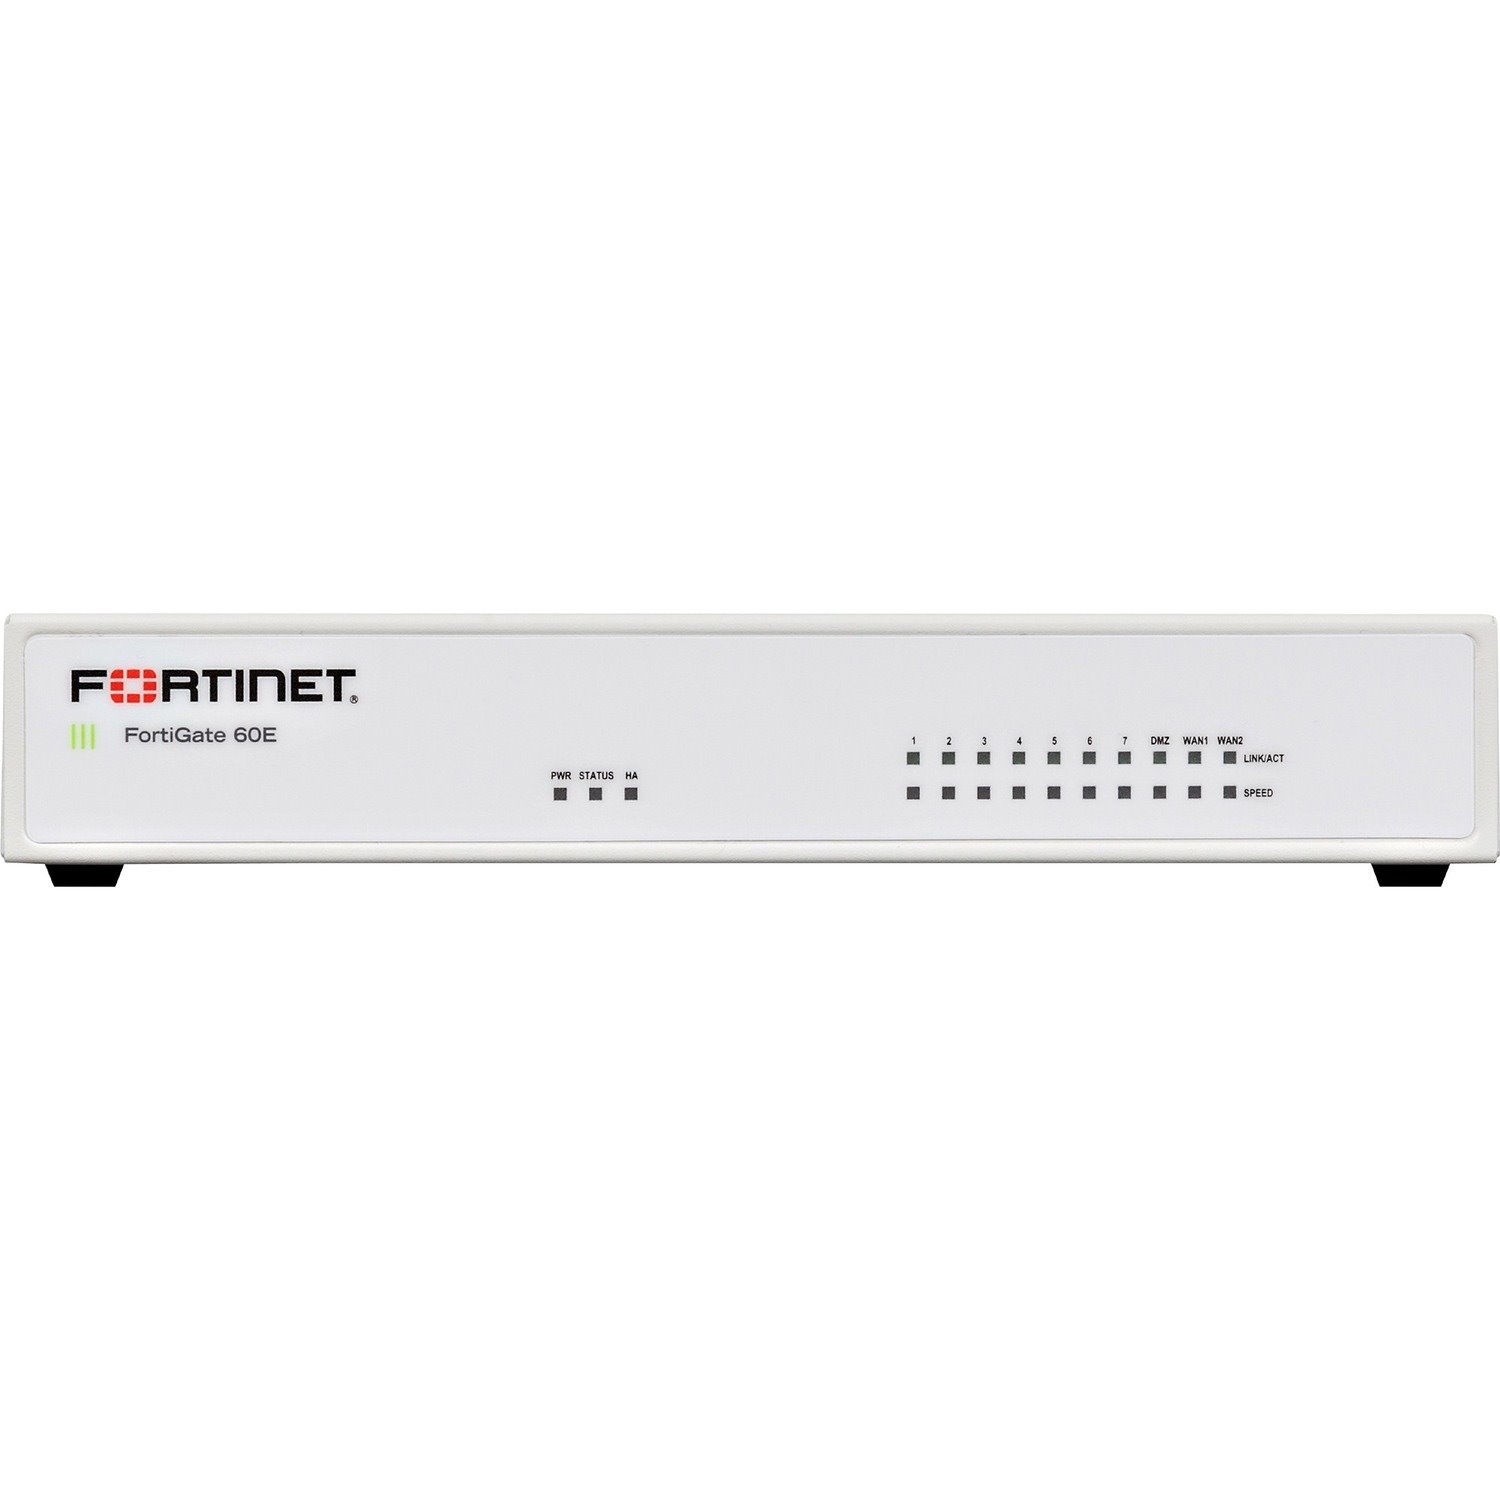 Fortinet FortiGate FG-60E Network Security/Firewall Appliance